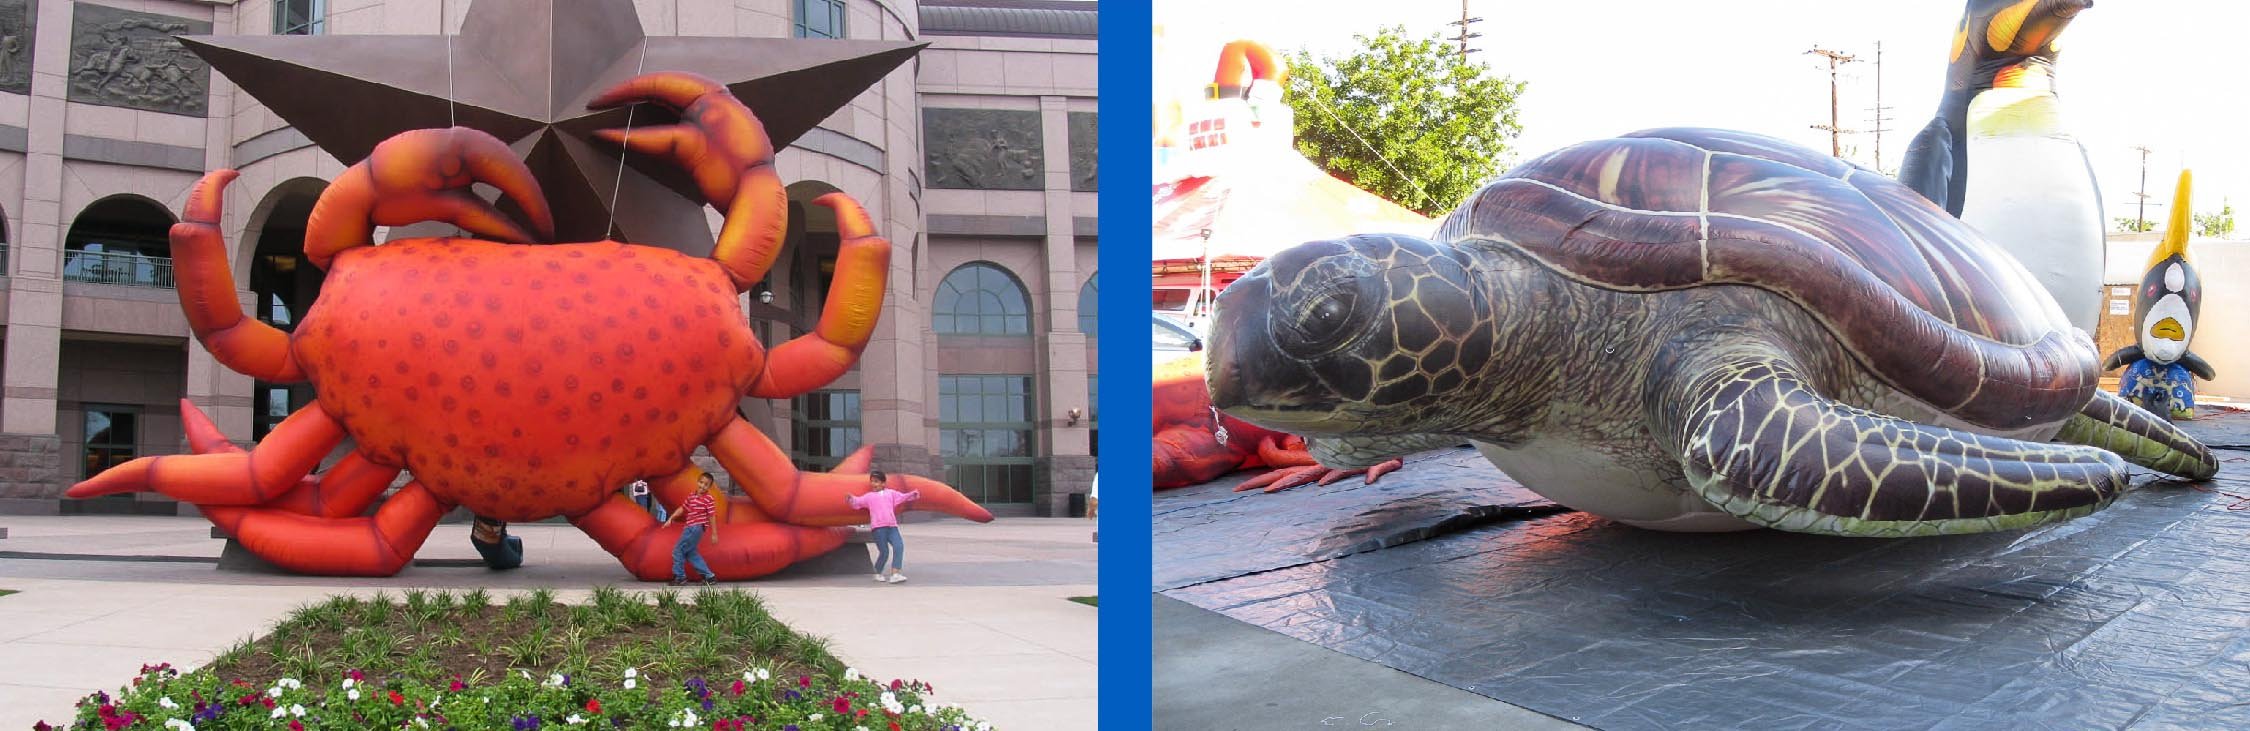 inflatable-crab-and-inflatable-sea-turtle